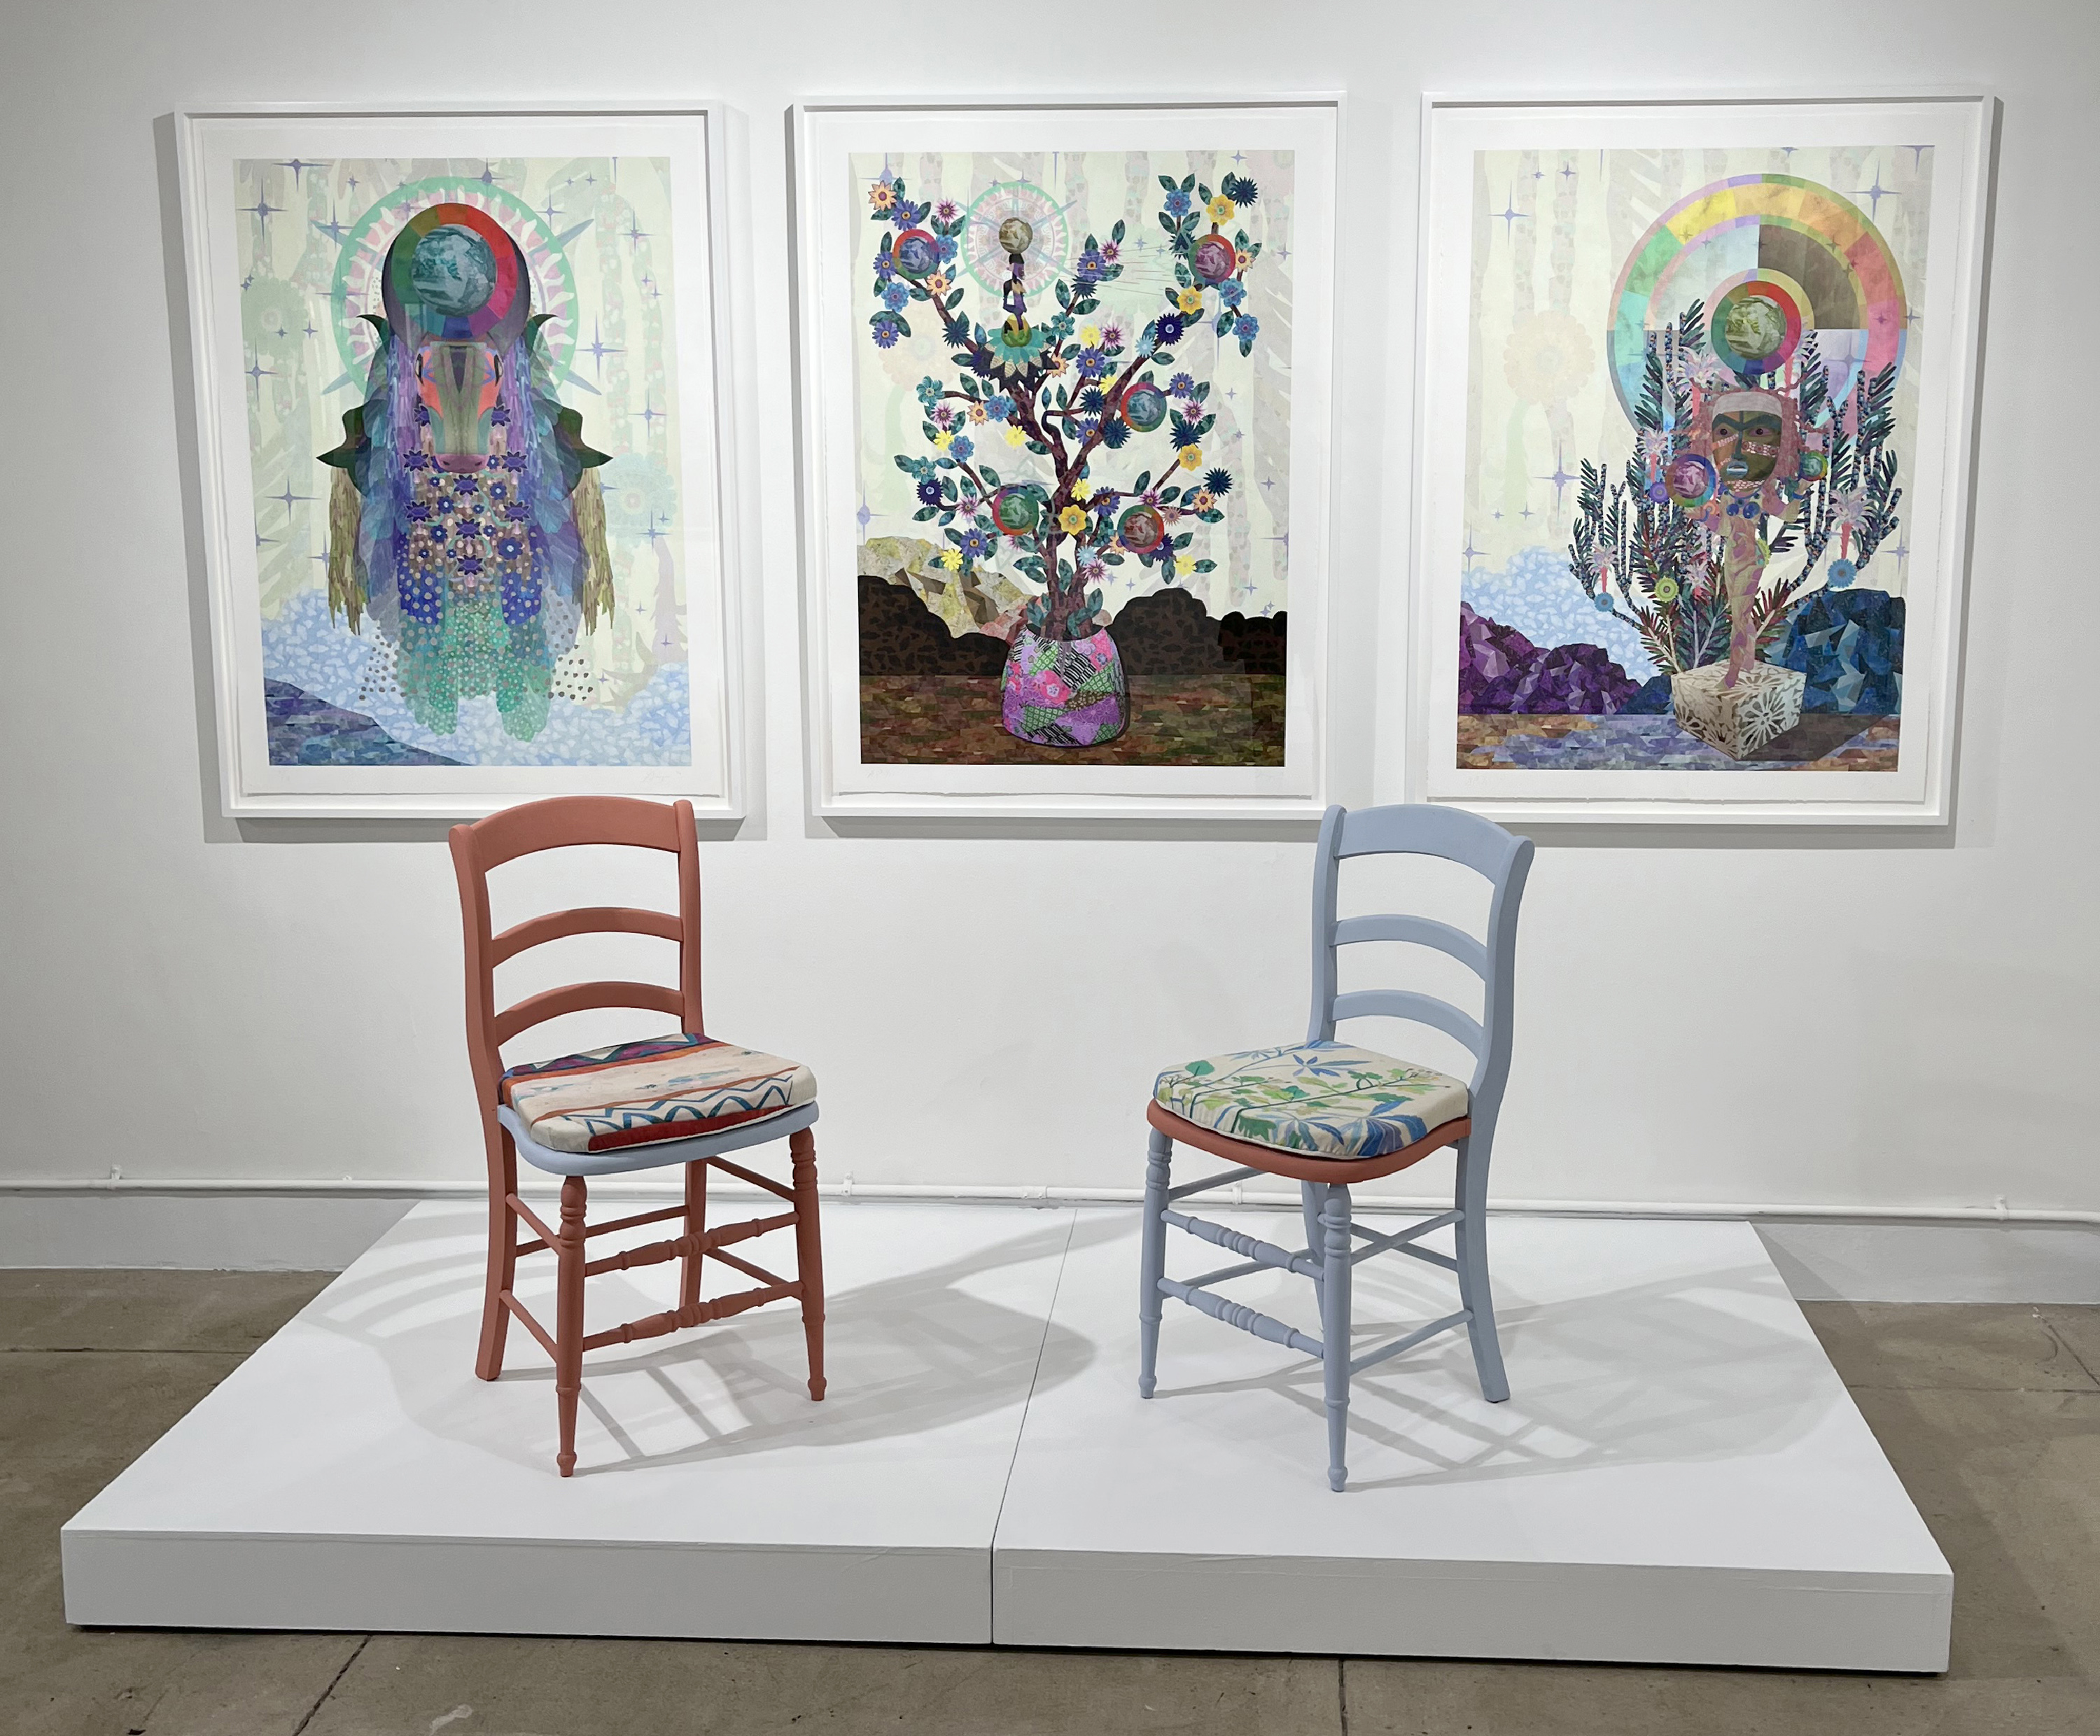 installation view with two chairs and framed prints